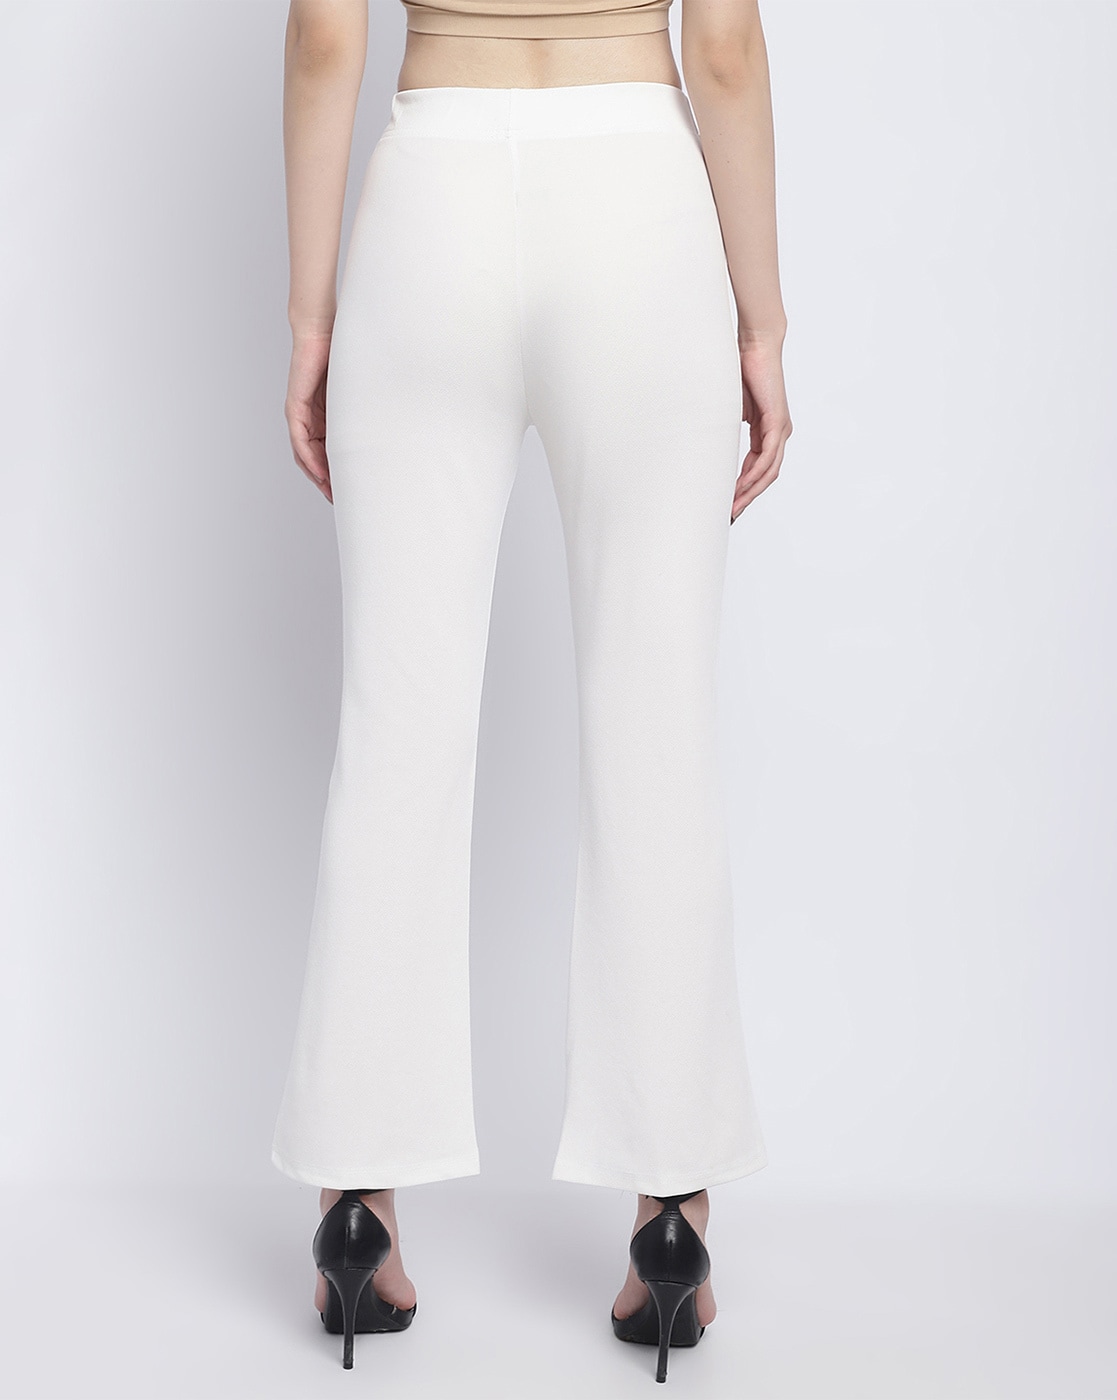 Diconna Women Solid High Elastich Flare Pants Polyester White S -  Walmart.com